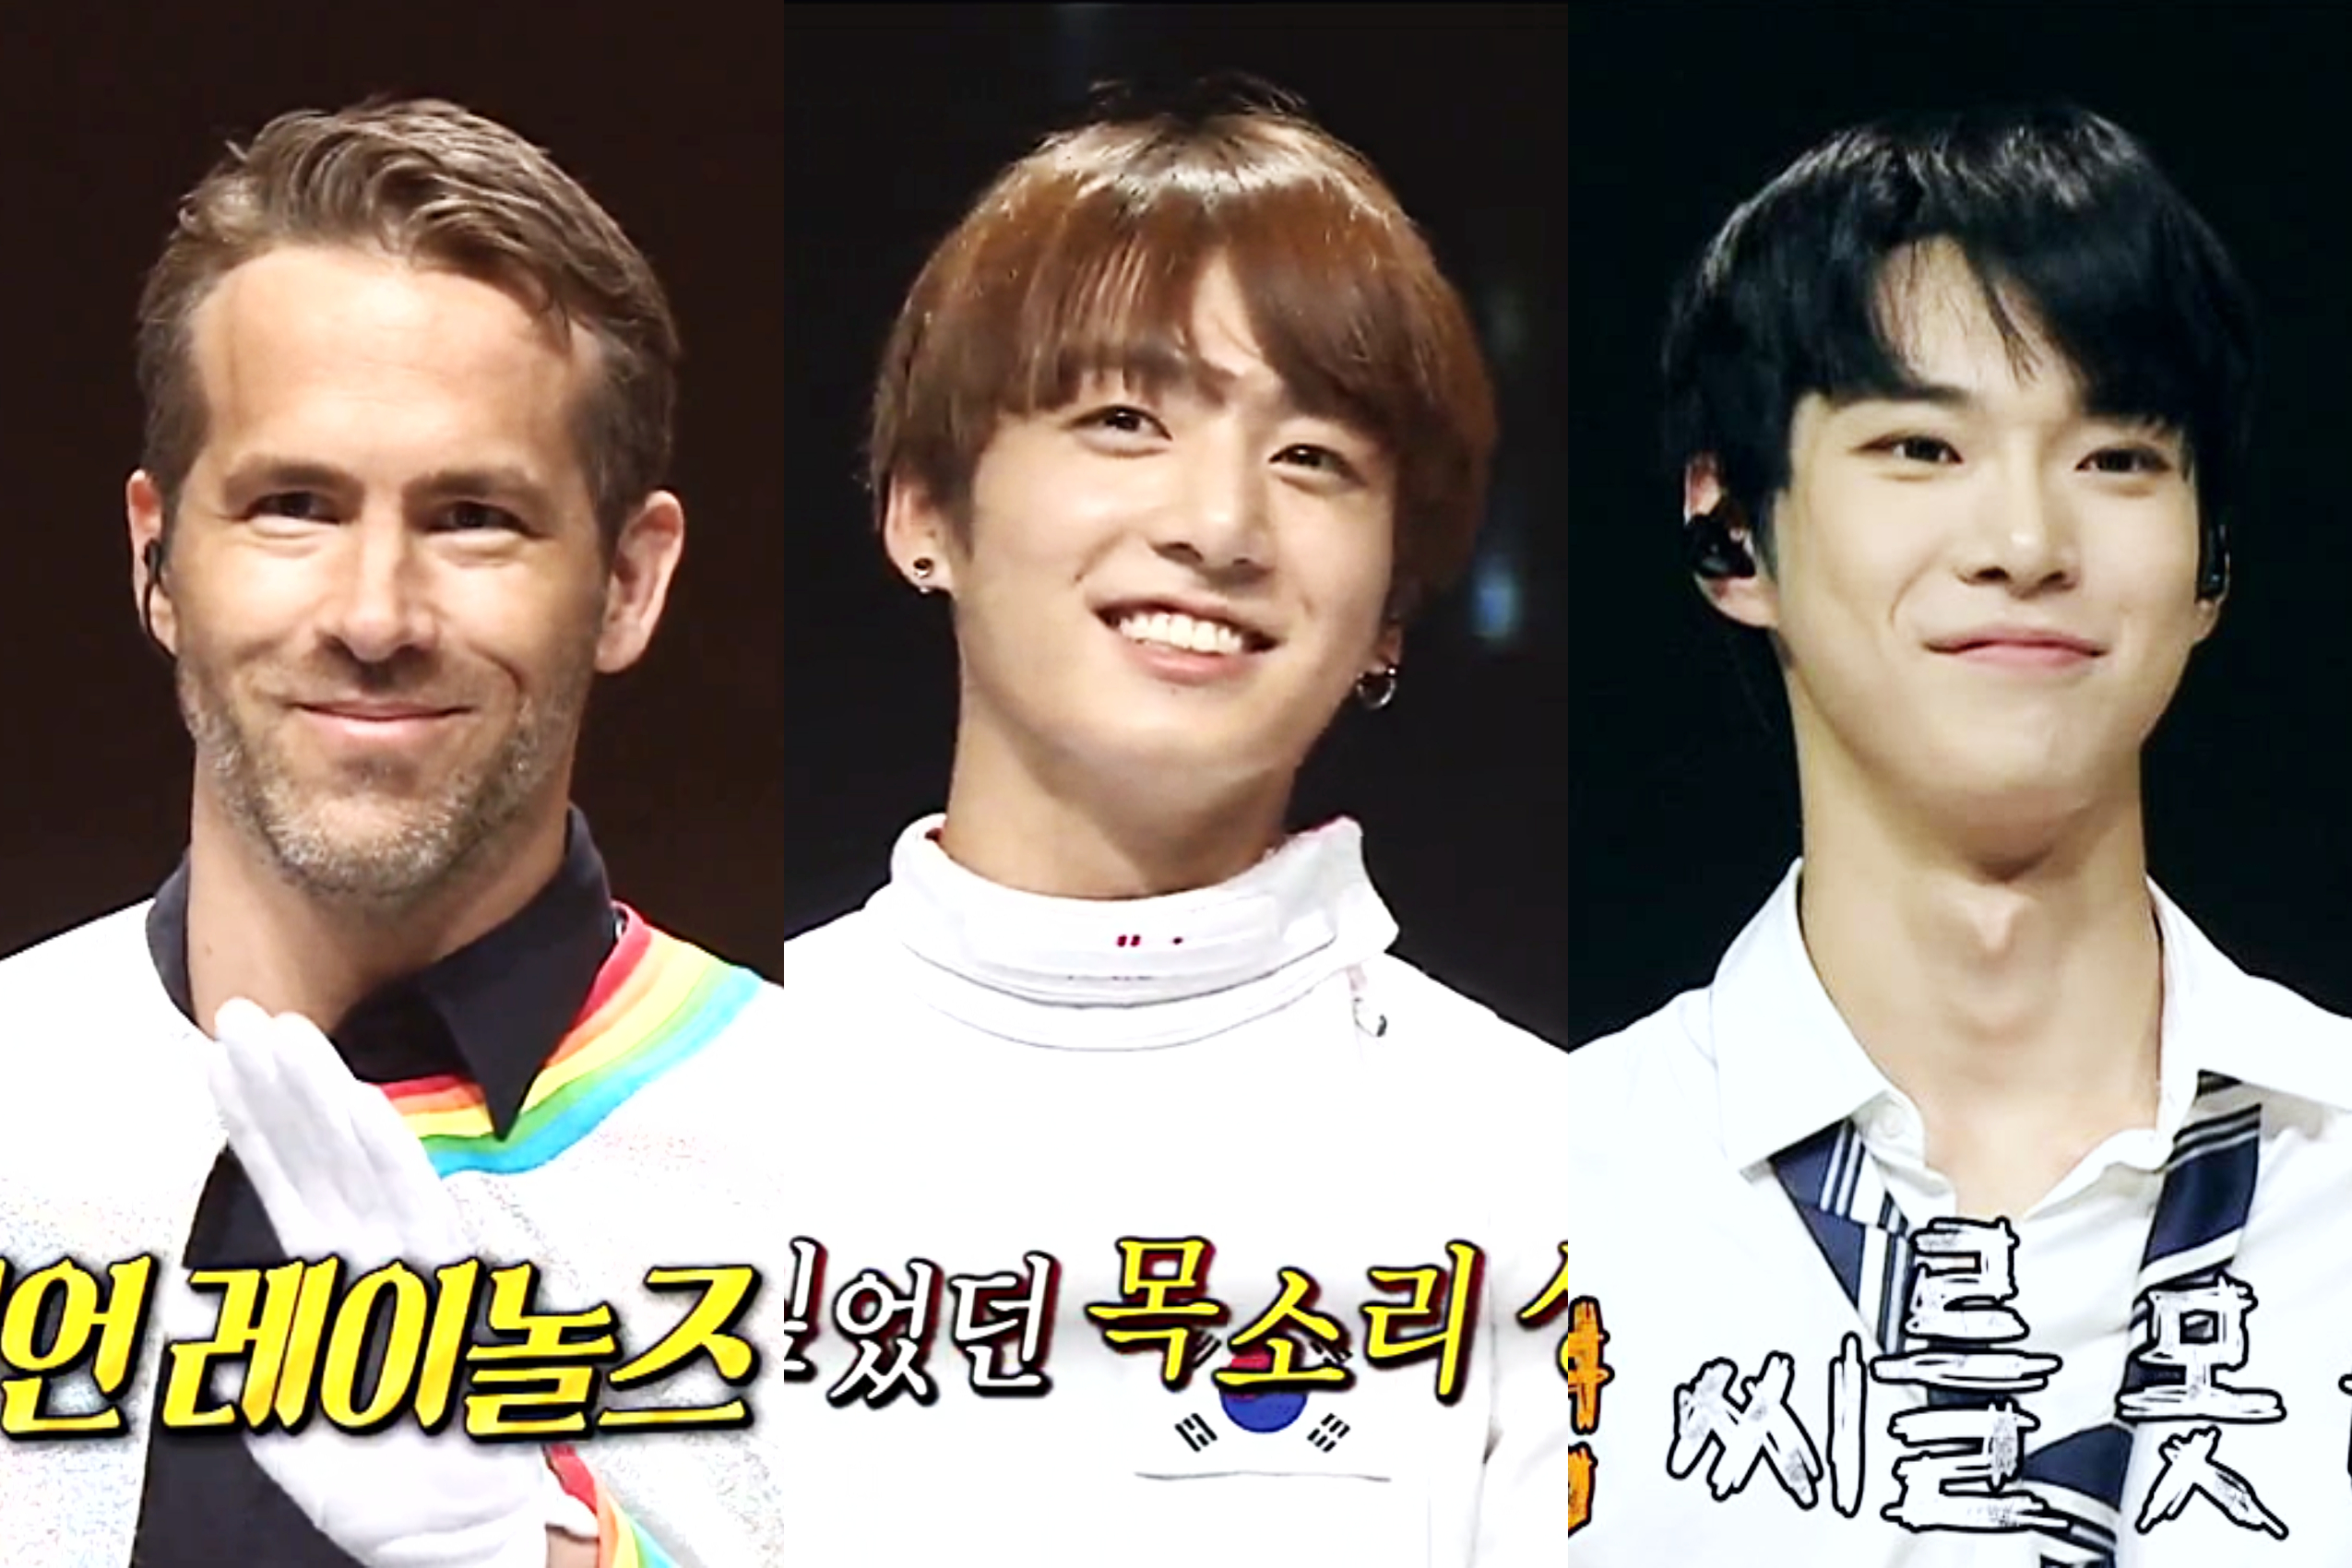 Doyoung Ryan Reynolds And Jungkook On The King Of Mask Singer